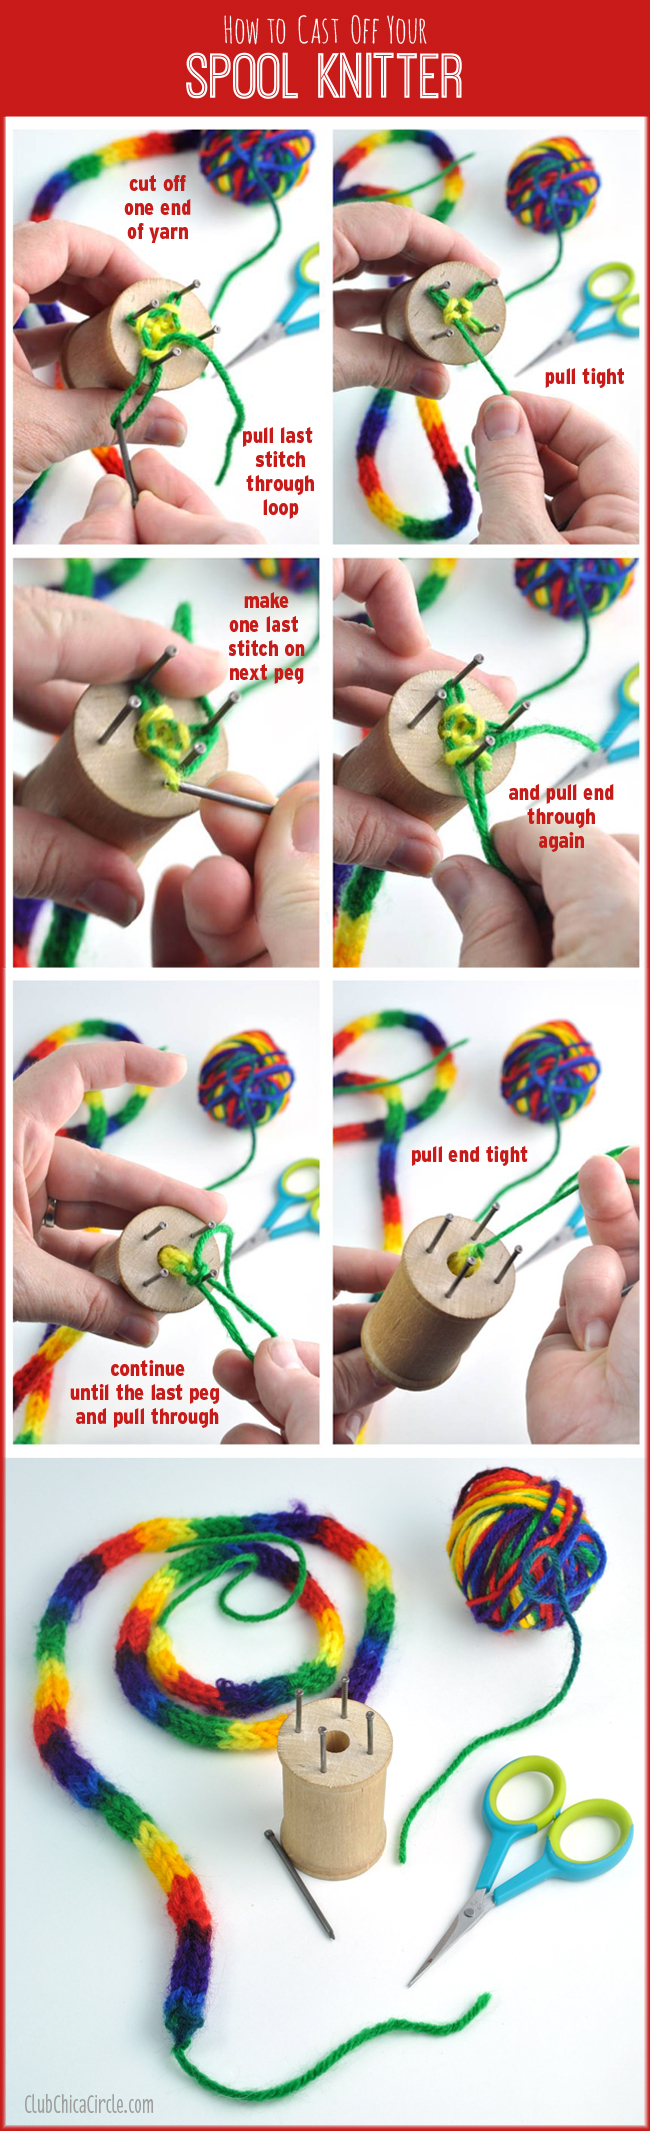 How to Cast Off your homemade Spool Knitter